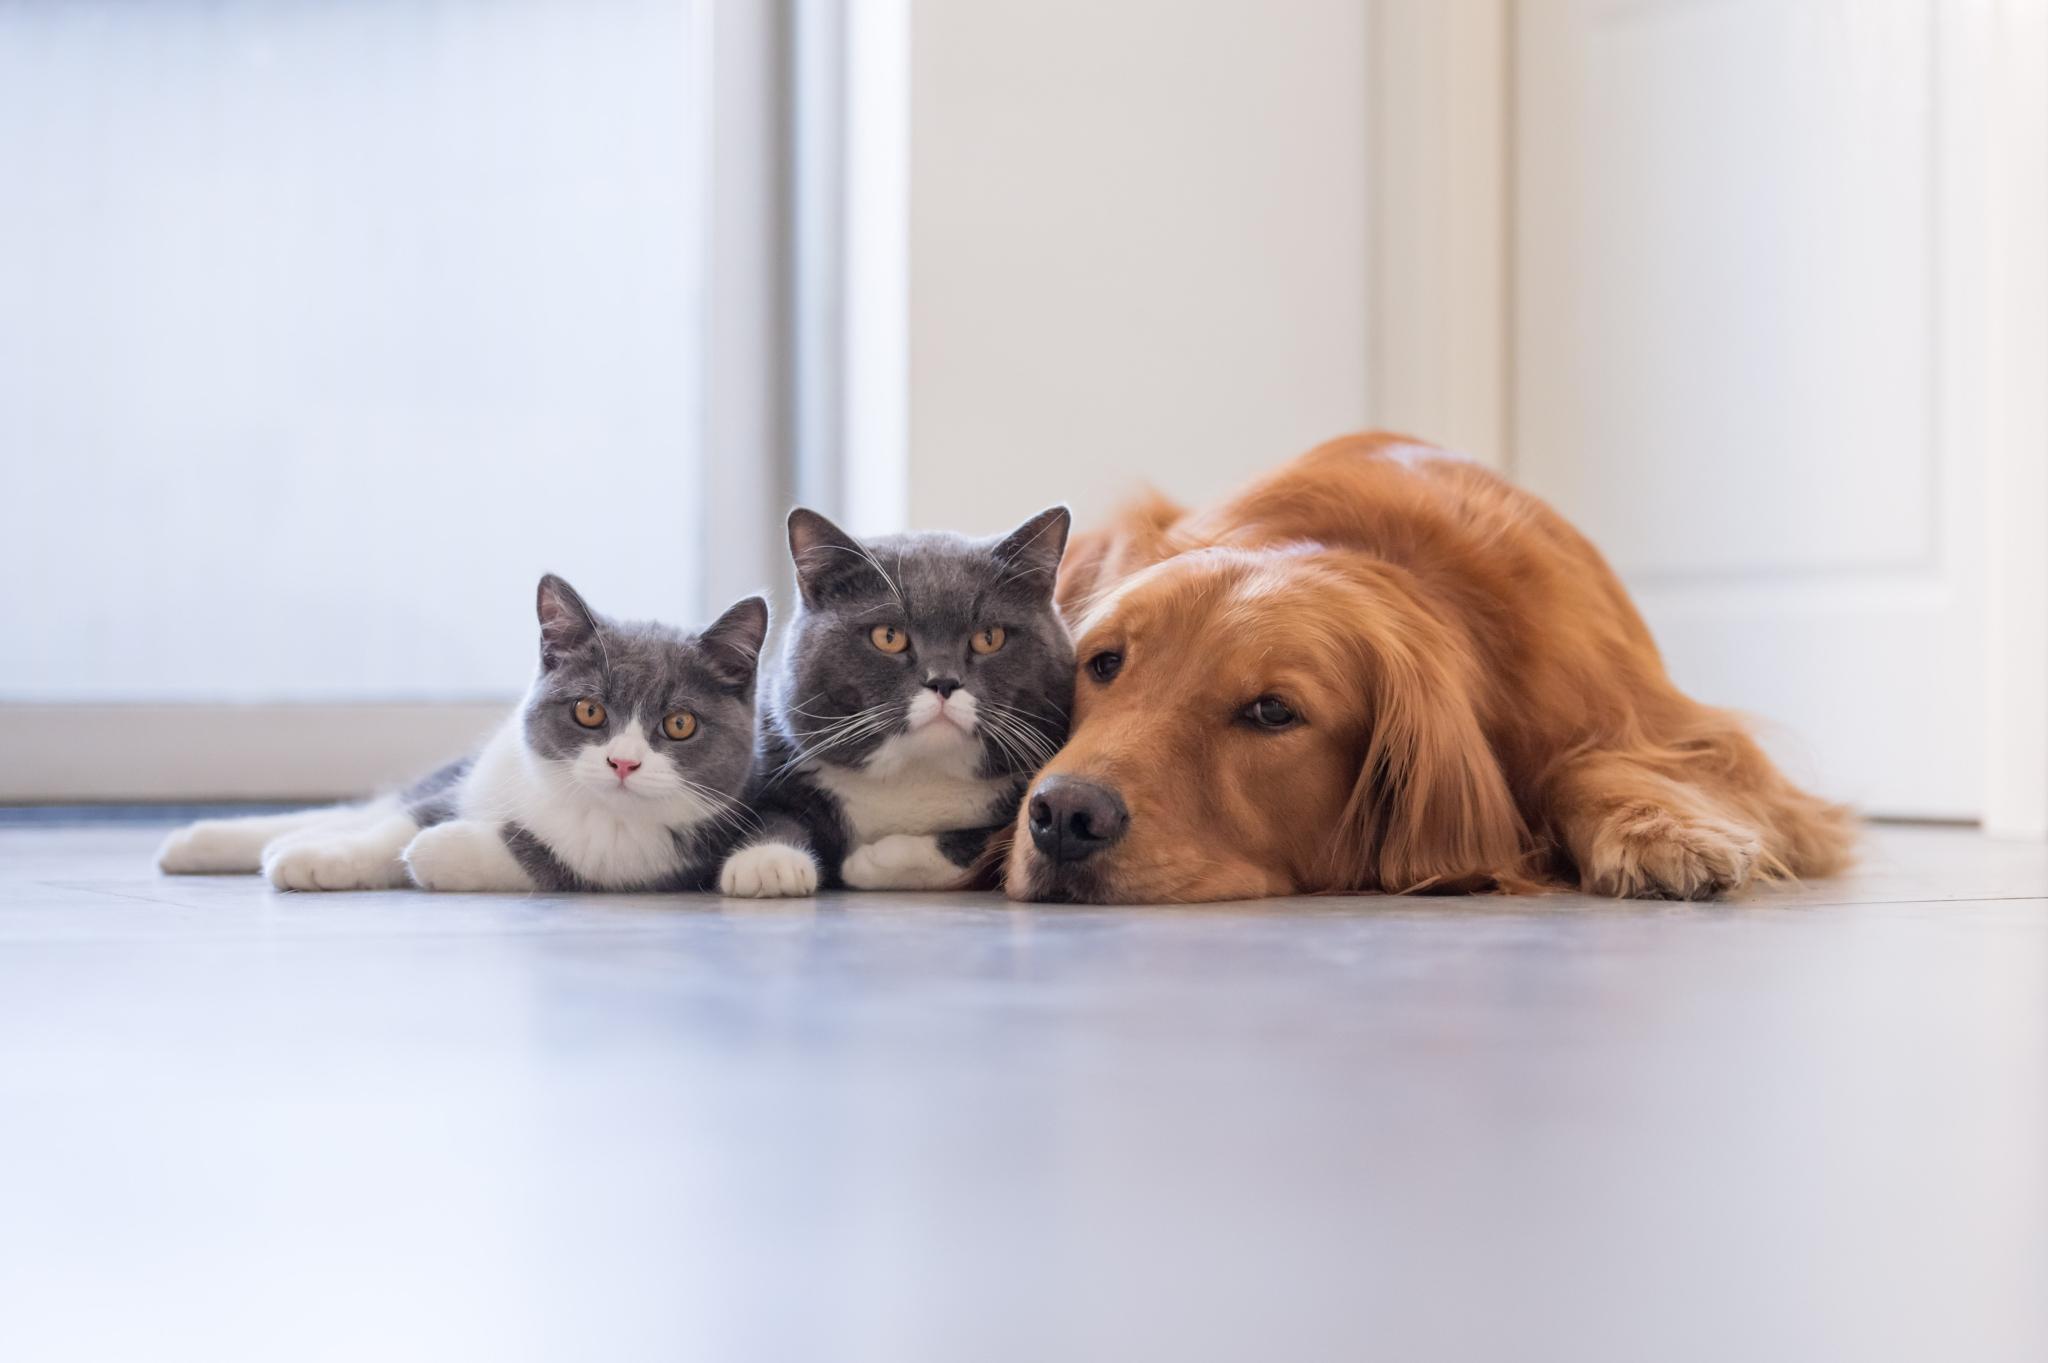 Cats and Dogs Living Together – Mass Hysteria?